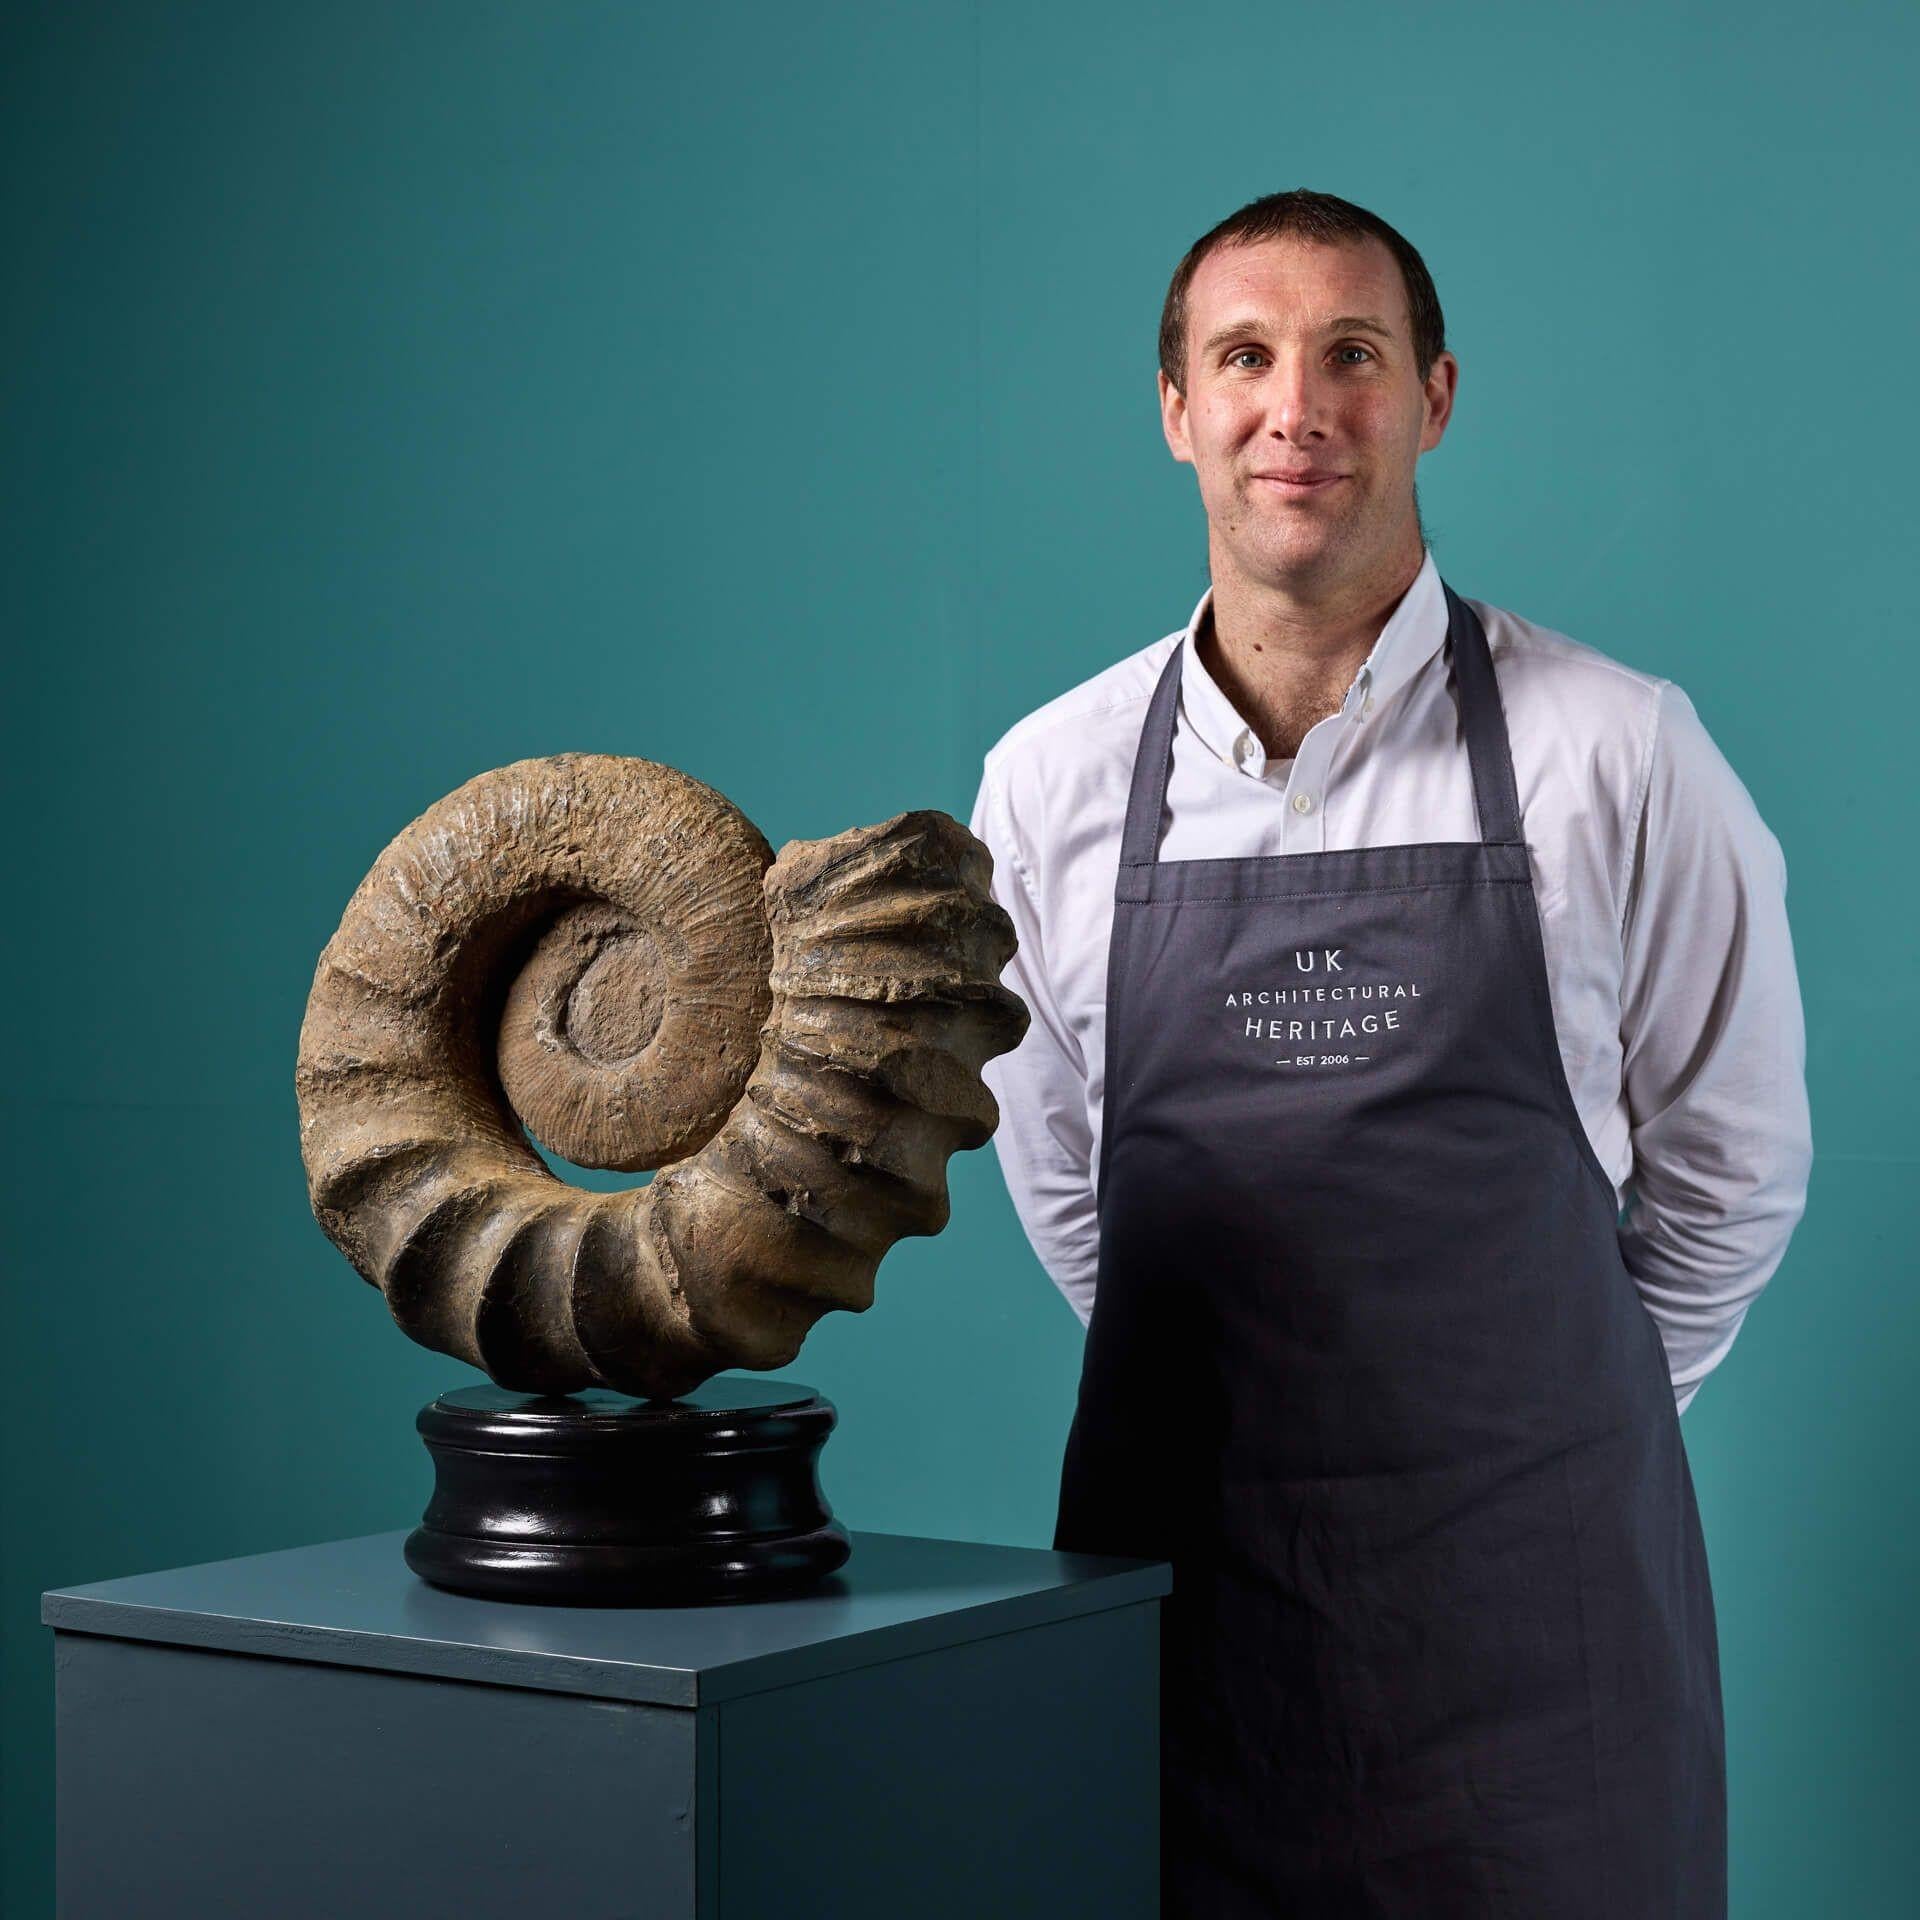 A superb naturally occurring tropaeum ammonite fossil mounted on one of our exclusive large display plinths originating from Whale Chine, Chale Bay, Isle of Wight.

Dating from the early cretaceous period (145 – 100 million years ago), this large